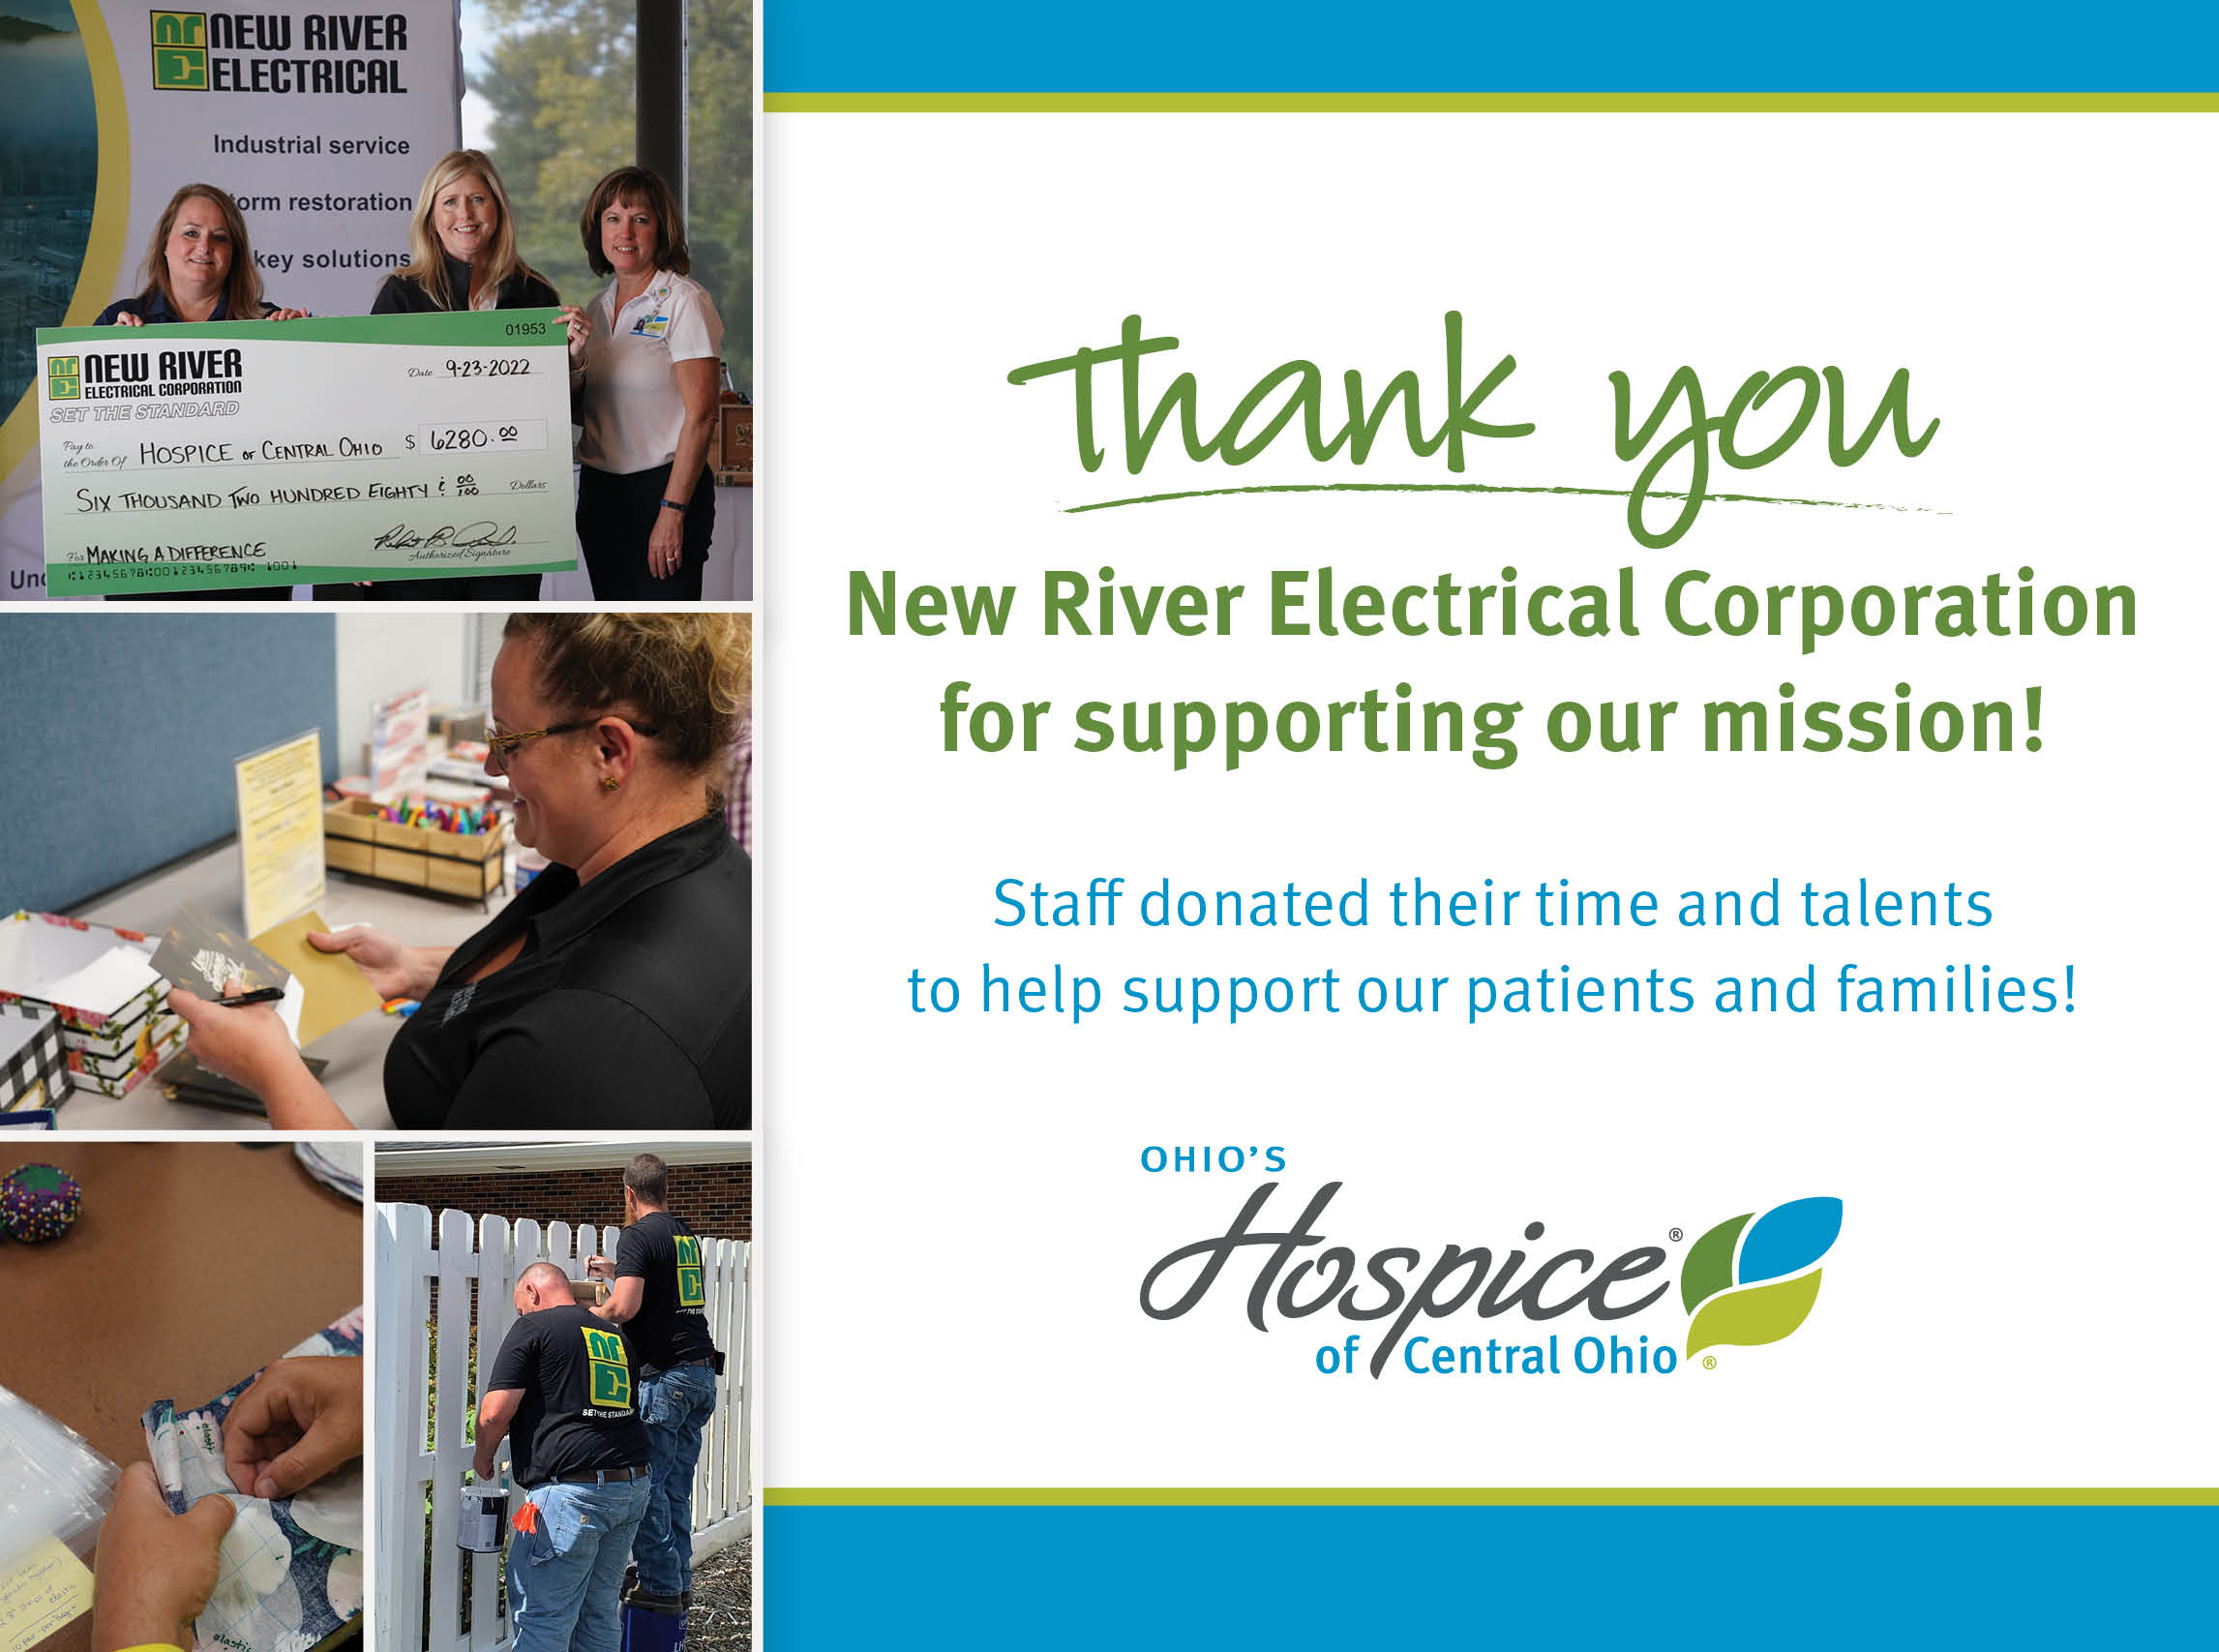 Thank you New River Electrical Corporation for supporting our mission.